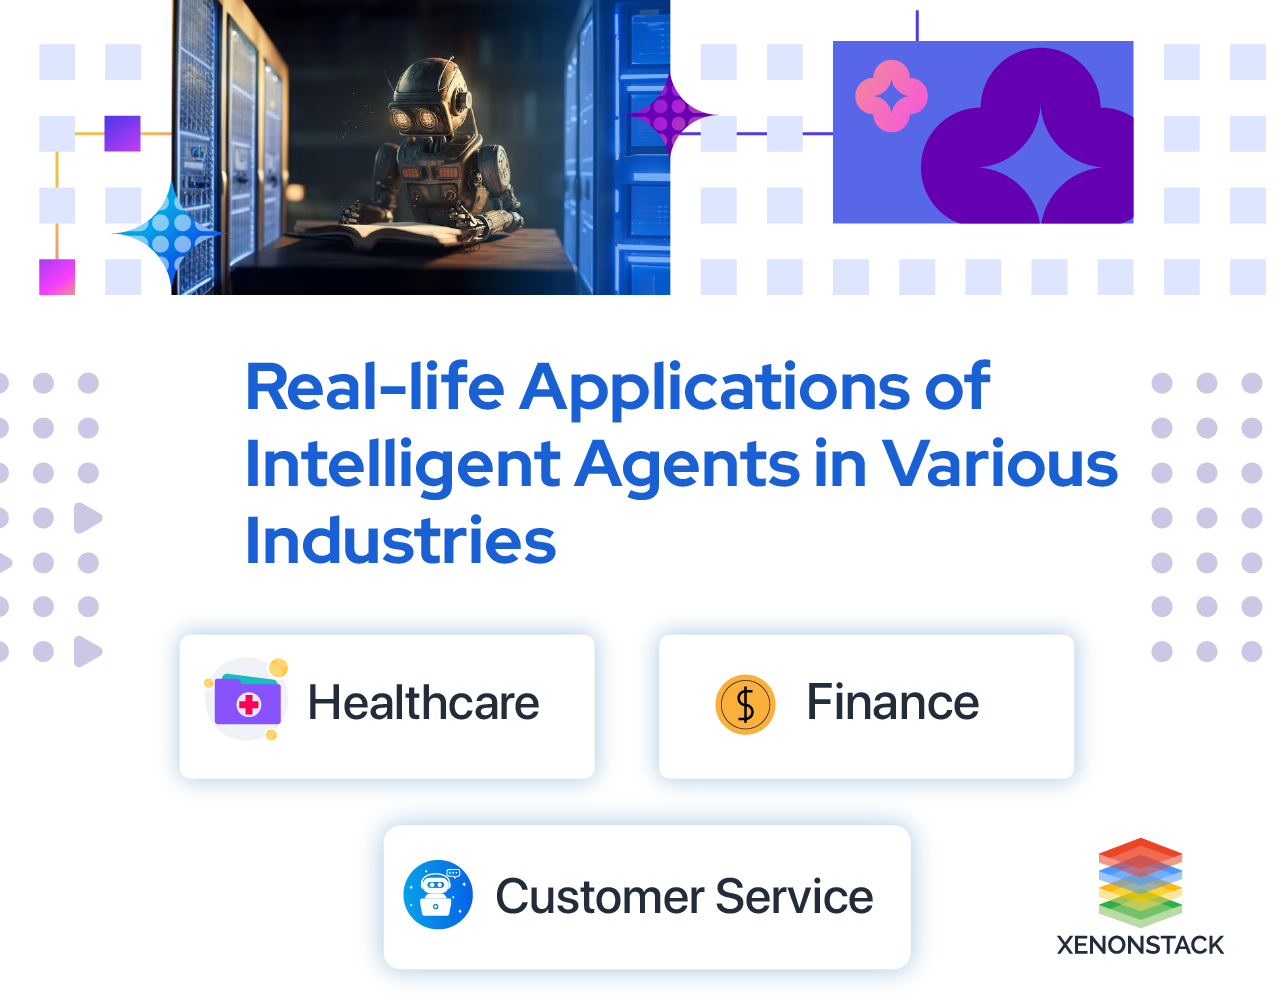 Real-life-applications-of-AI-Agents